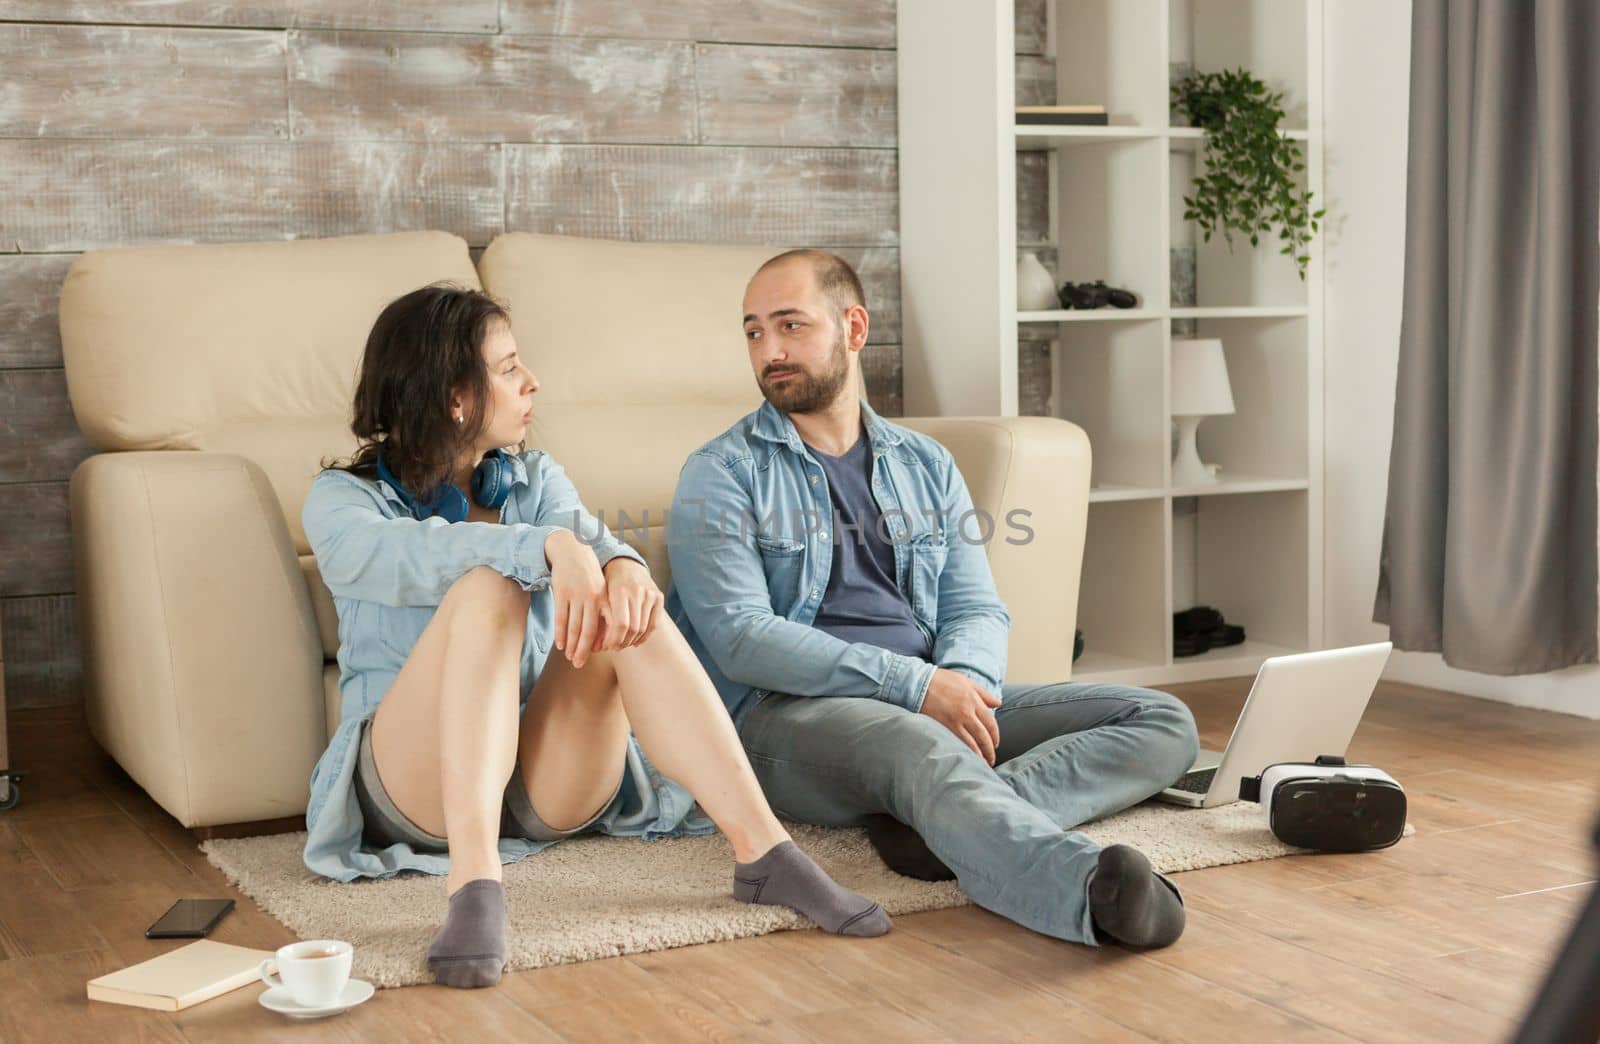 Couple looking at each other sitting down living room carpet.